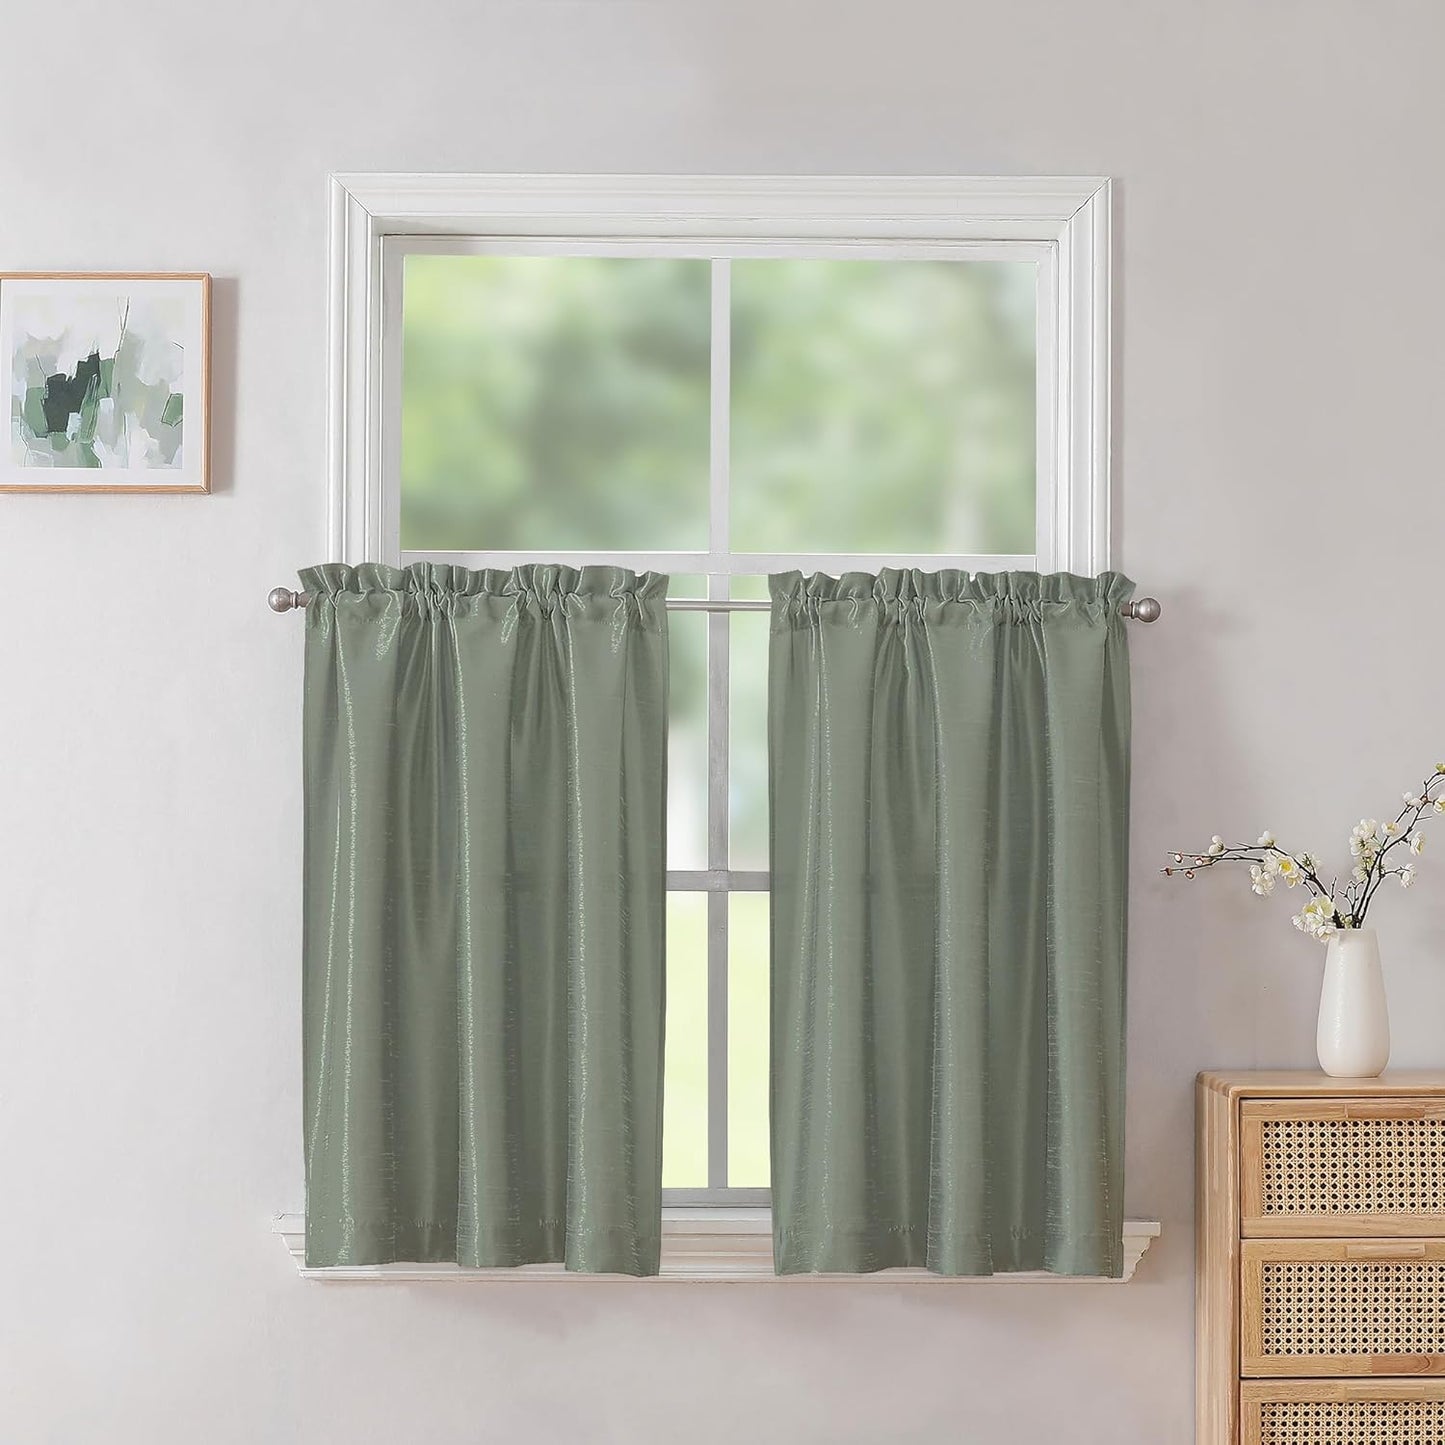 Chyhomenyc Uptown Sage Green Kitchen Curtains 45 Inch Length 2 Panels, Room Darkening Faux Silk Chic Fabric Short Window Curtains for Bedroom Living Room, Each 30Wx45L  Chyhomenyc Sage Green 2X40"Wx36"L 